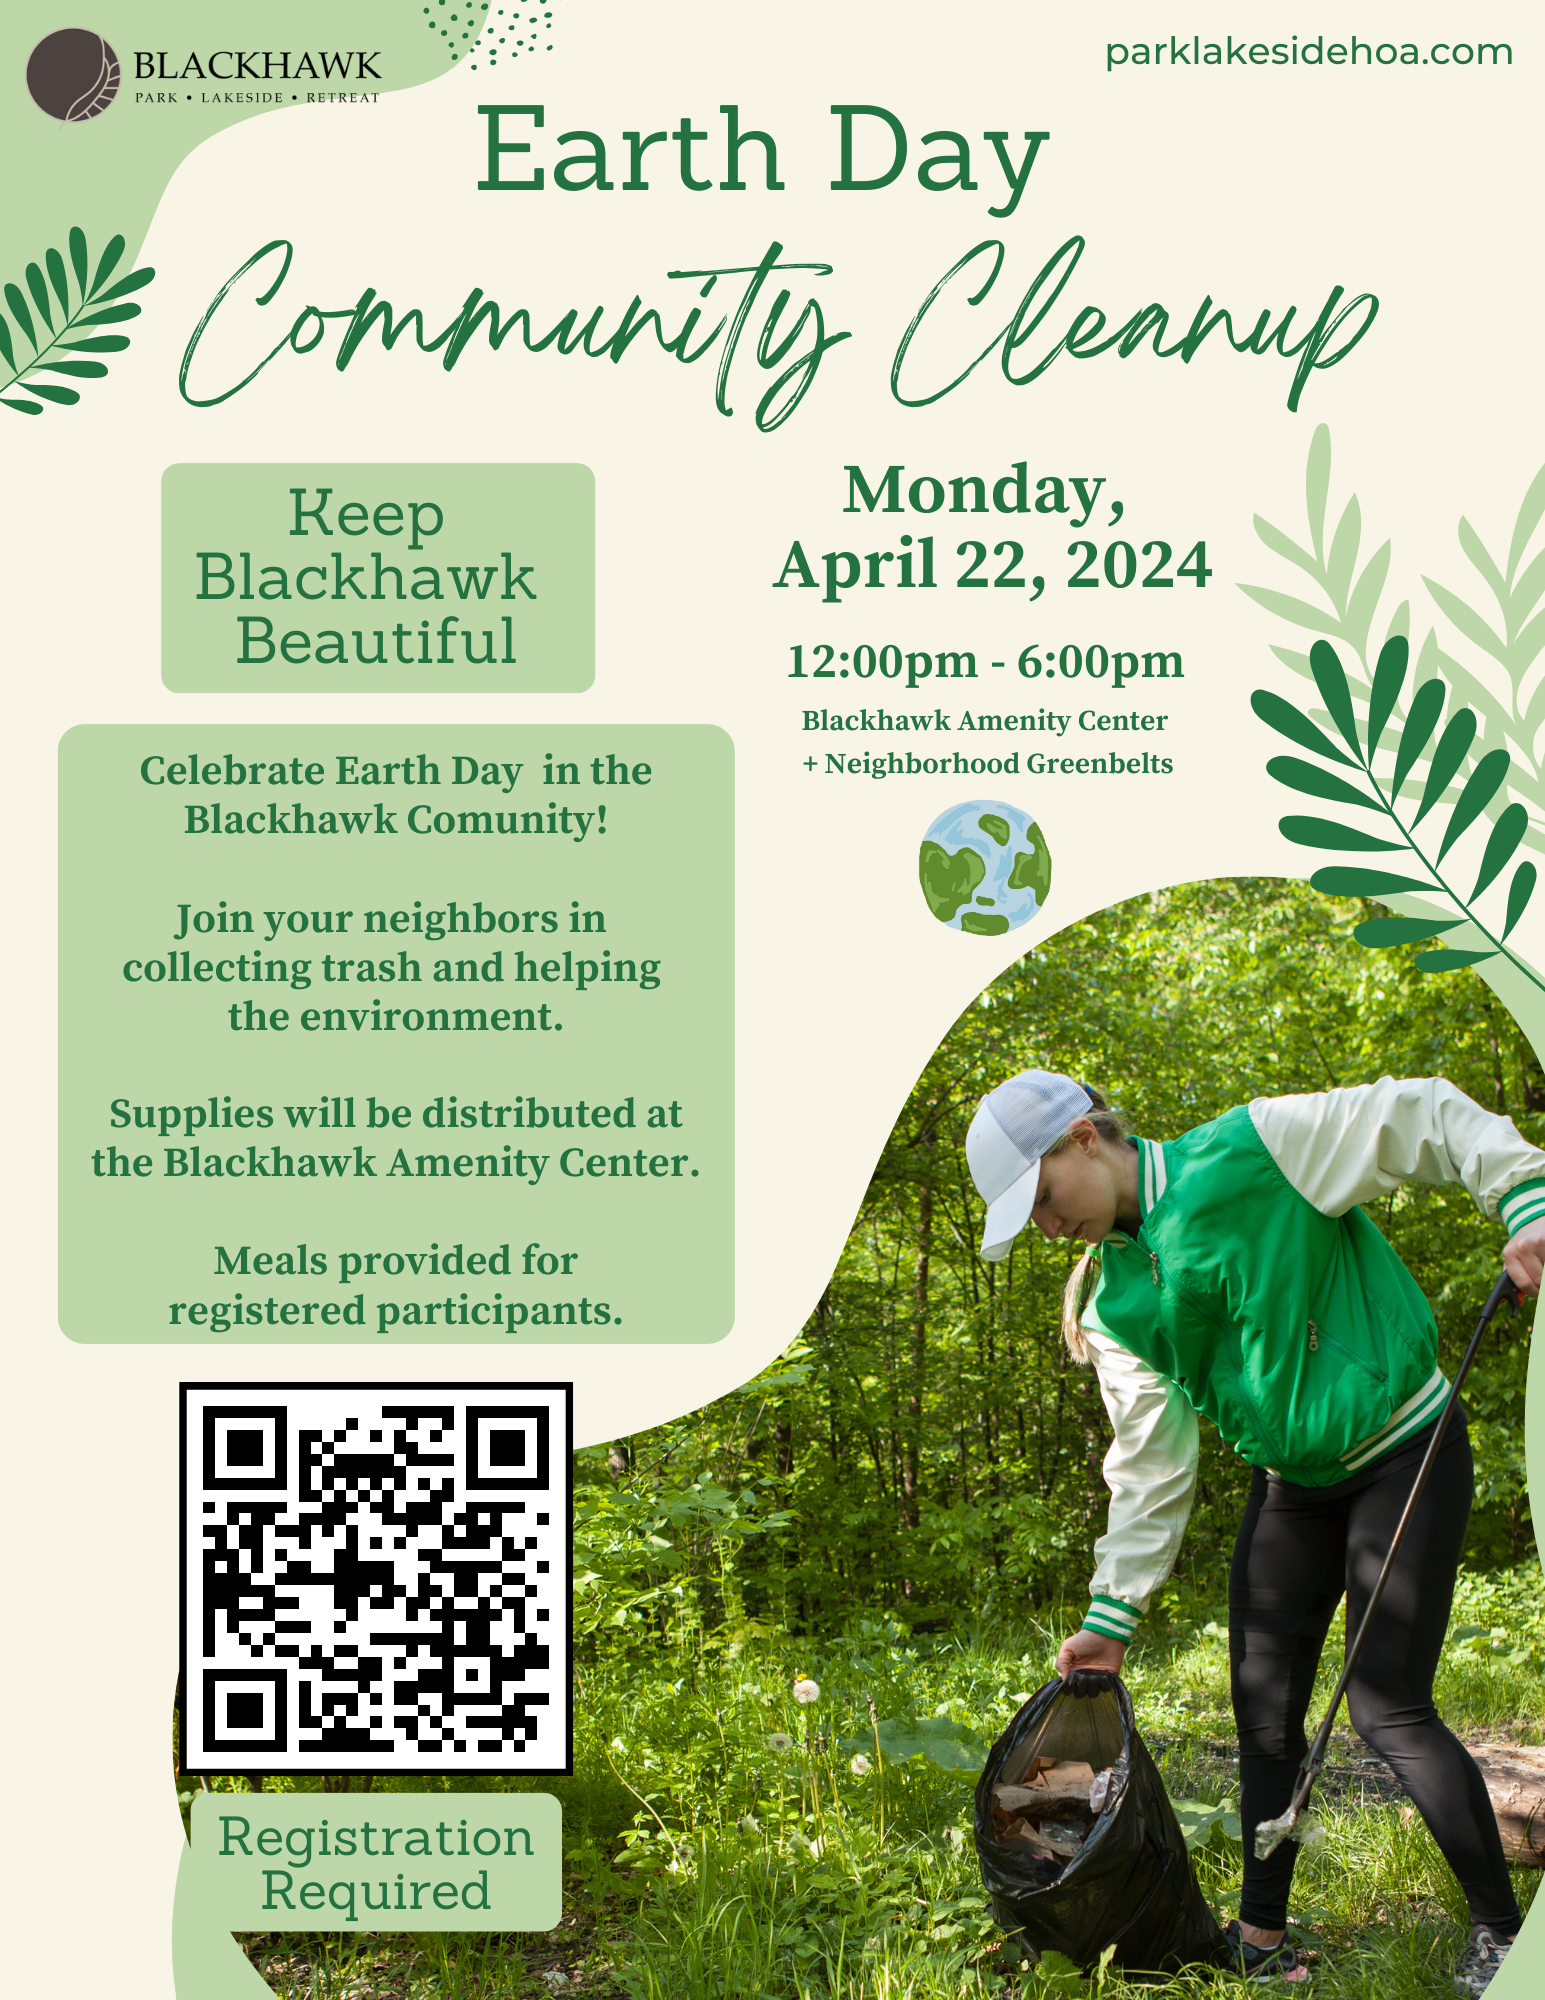 Flyer for the Earth Day Community Cleanup event in the Blackhawk community on Monday, April 22, 2024, from 12:00 pm to 6:00 pm, as shown at the top right with a website link. The Blackhawk logo is at the top left. The event title 'Earth Day Community Cleanup' is prominently displayed in the center with a nature-inspired design featuring green leaves. The flyer encourages community members to 'Keep Blackhawk Beautiful' and join the trash collection effort to help the environment. Details are provided for supply distribution at the Blackhawk Amenity Center, with a note that meals will be provided for registered participants. A QR code for registration and a statement 'Registration Required' are prominently displayed at the bottom. A photograph of a person in a green jacket picking up trash is shown on the right.